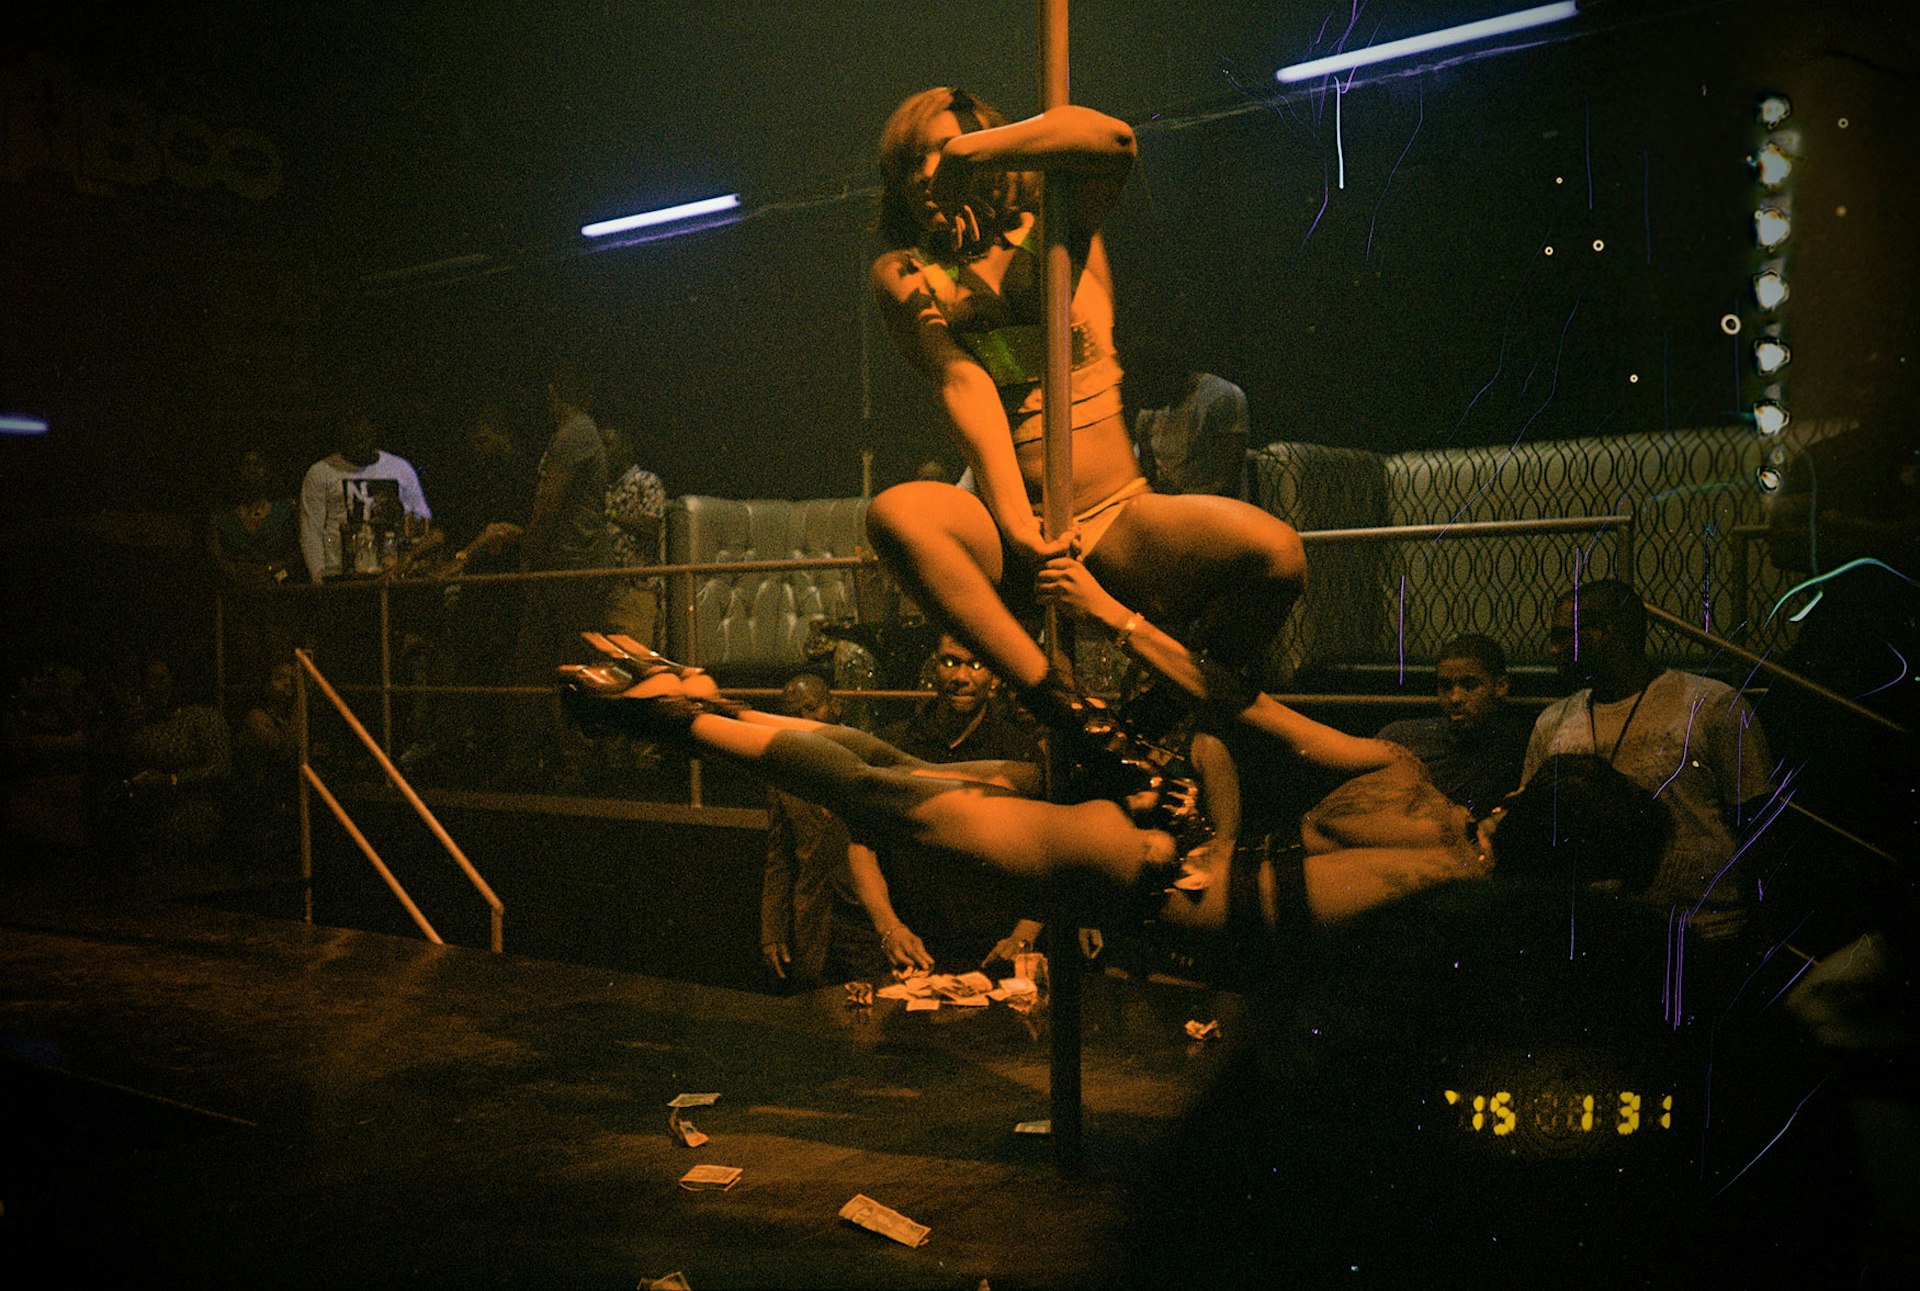 Taken at Taboo, a Montego Bay strip club frequented by people from the dancehall scene.